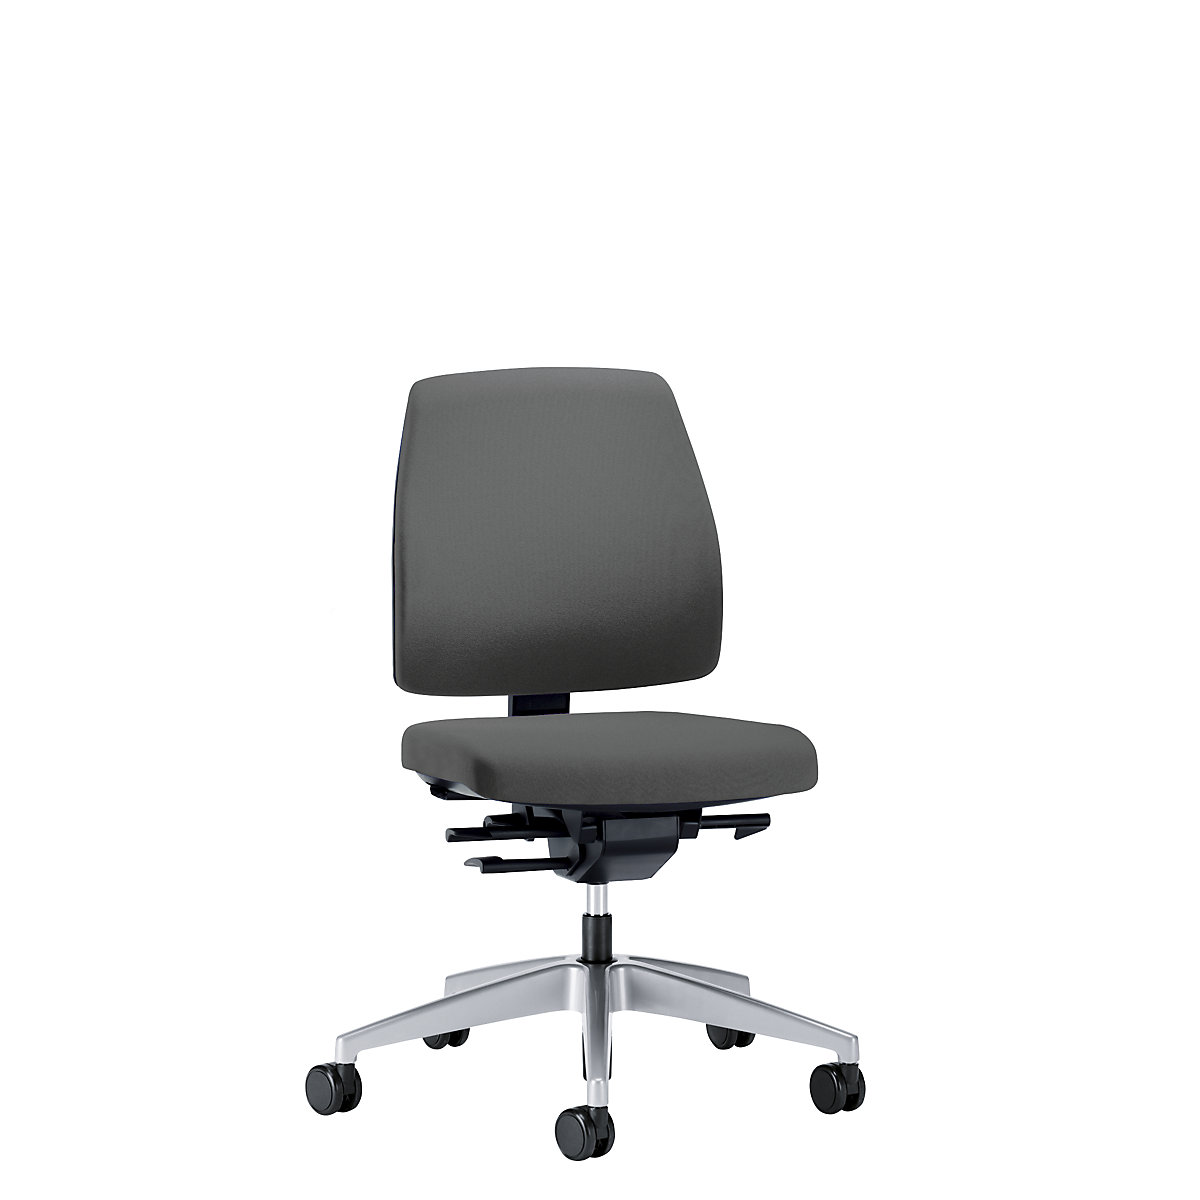 GOAL office swivel chair, back rest height 430 mm – interstuhl, brilliant silver frame, with soft castors, iron grey, seat depth 410 mm-5